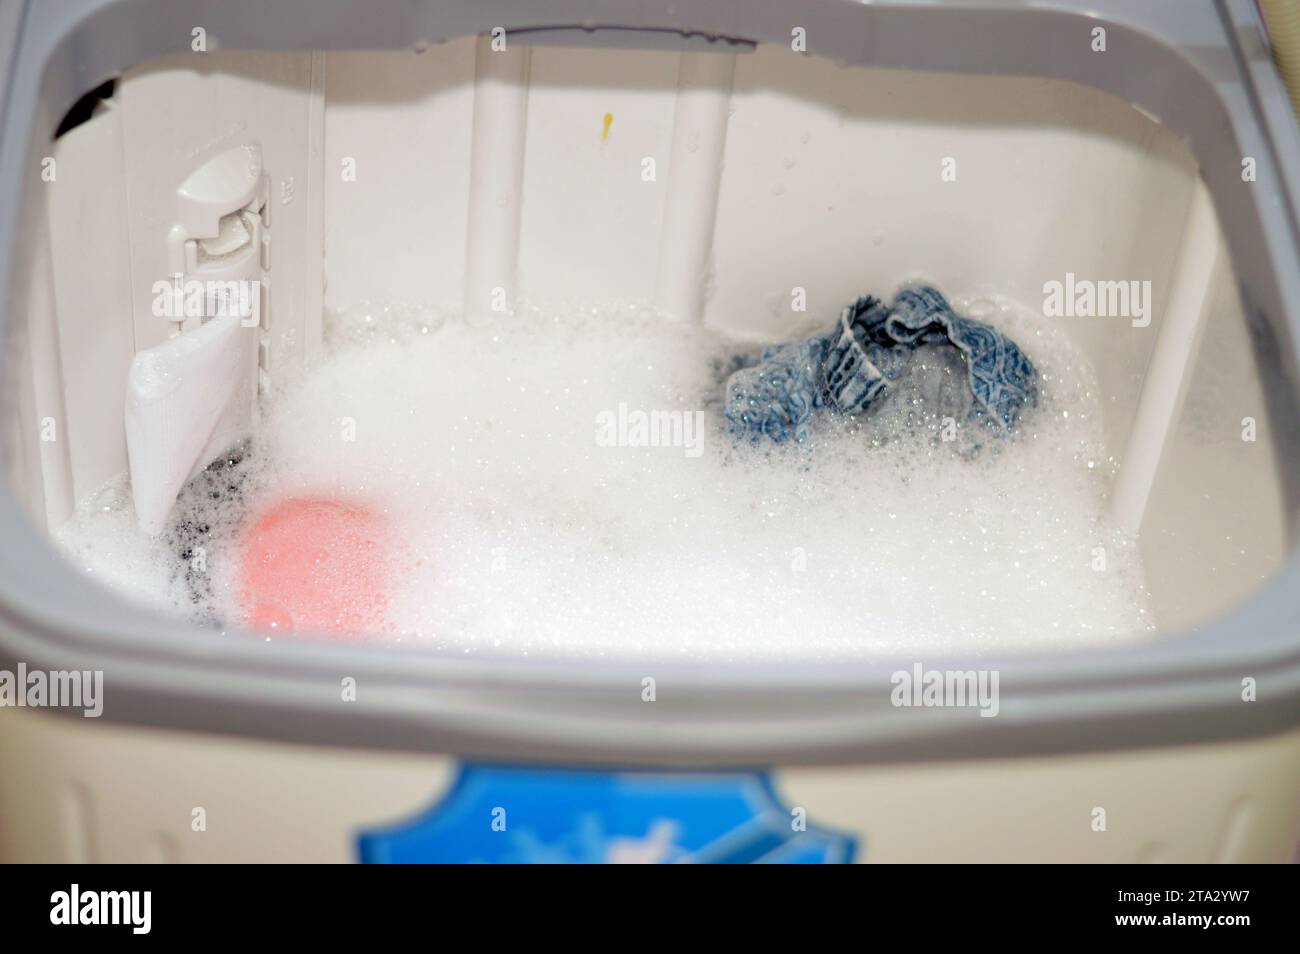 manual top load washing machine, laundry clothes washer, a home appliance used to wash laundry, user adds laundry detergent, which is sold in liquid, Stock Photo